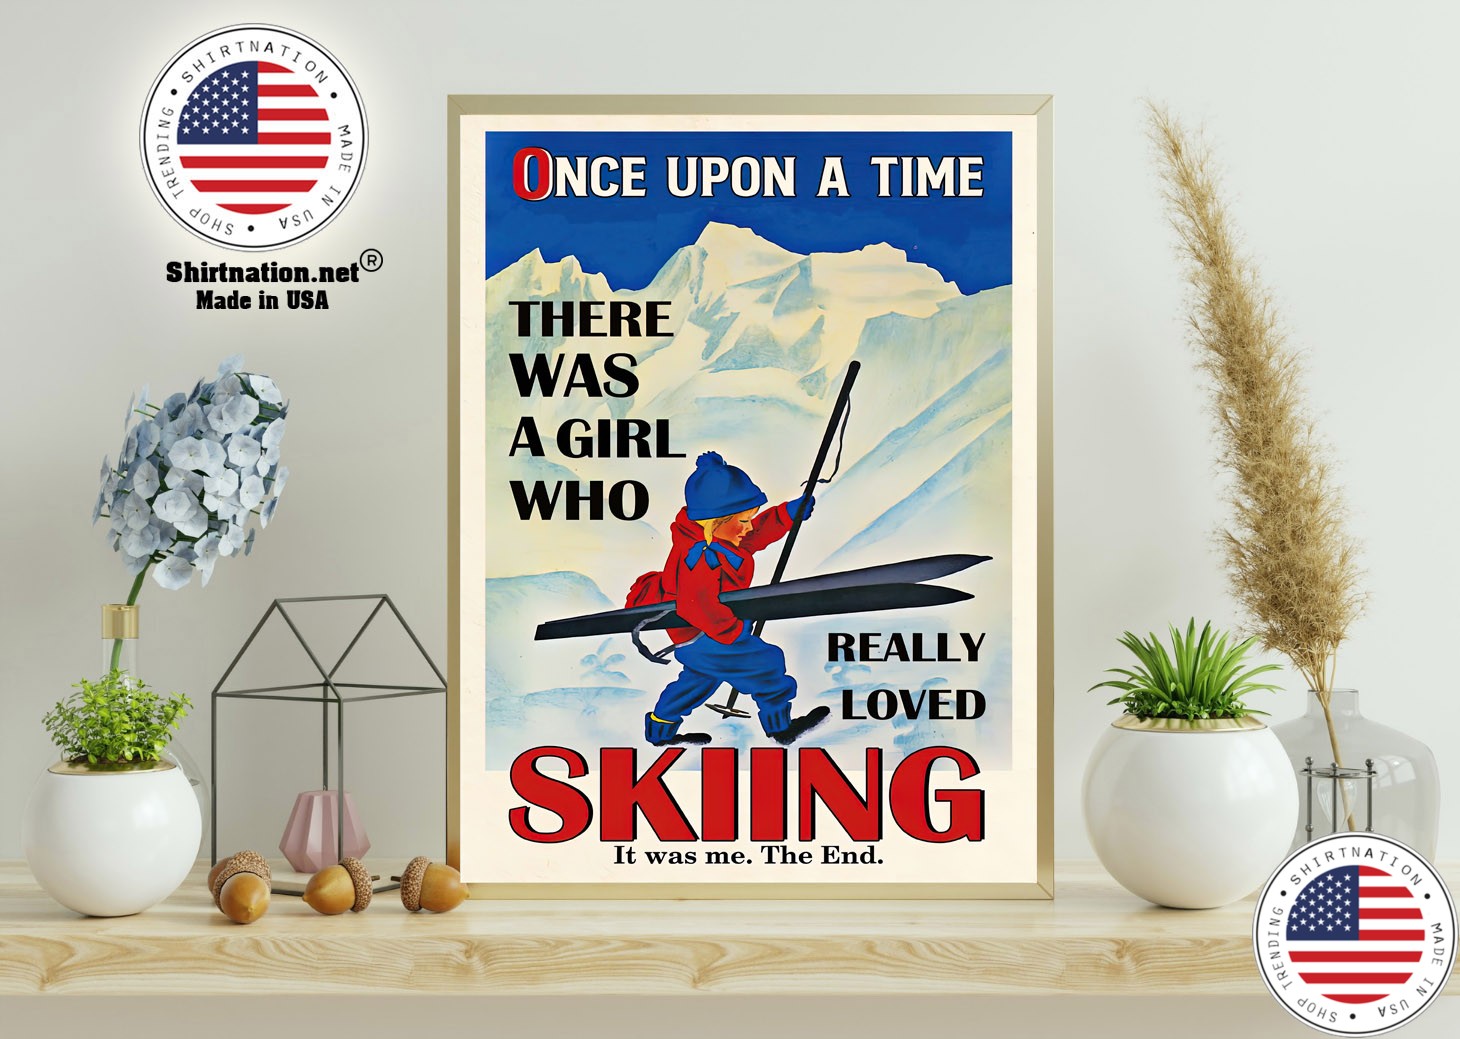 Once upon a time there was a girl who really loved skiing poster 11